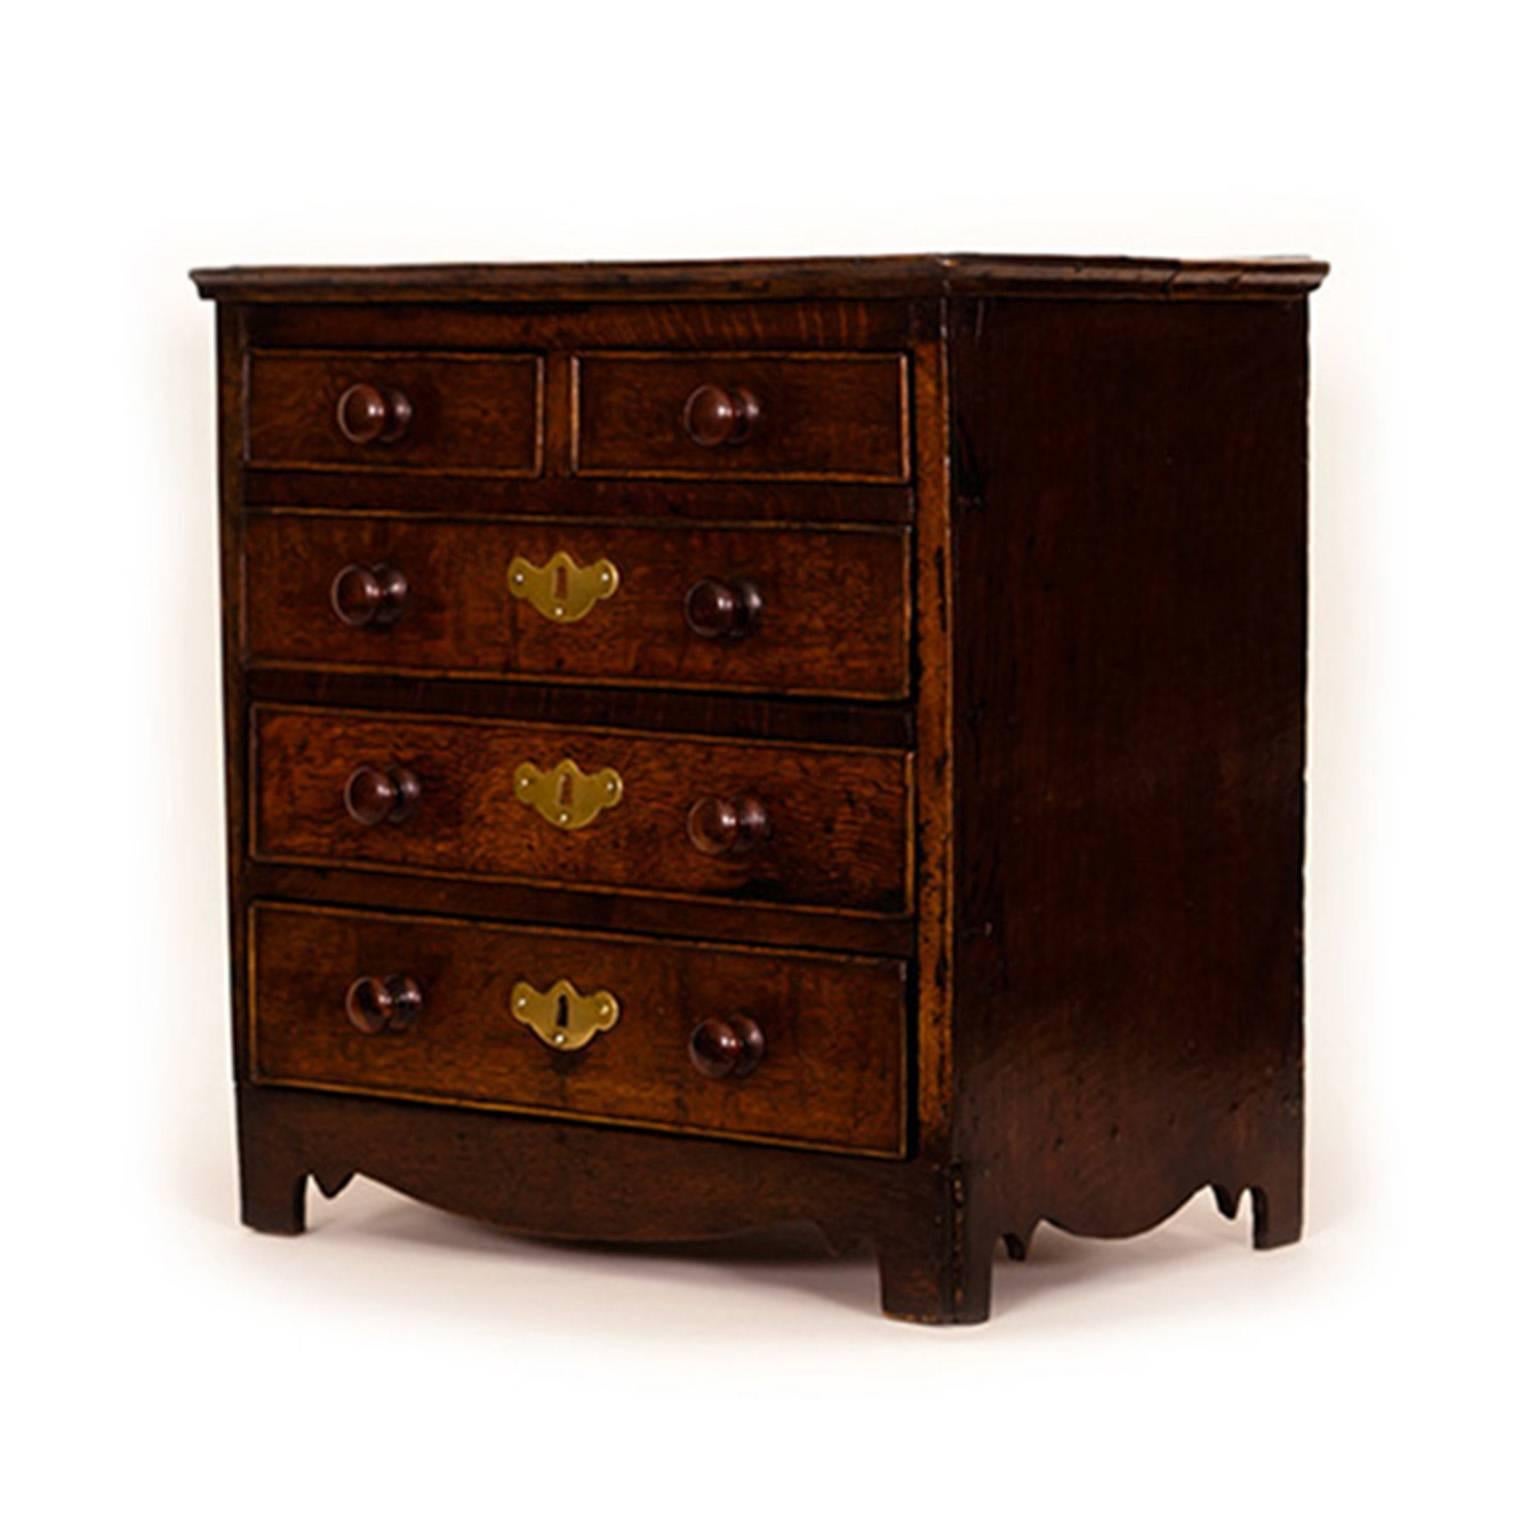 A sample-sized chest with a touch of country class. It is crafted wholly of oak and retains its original surface, color and turned knobs.